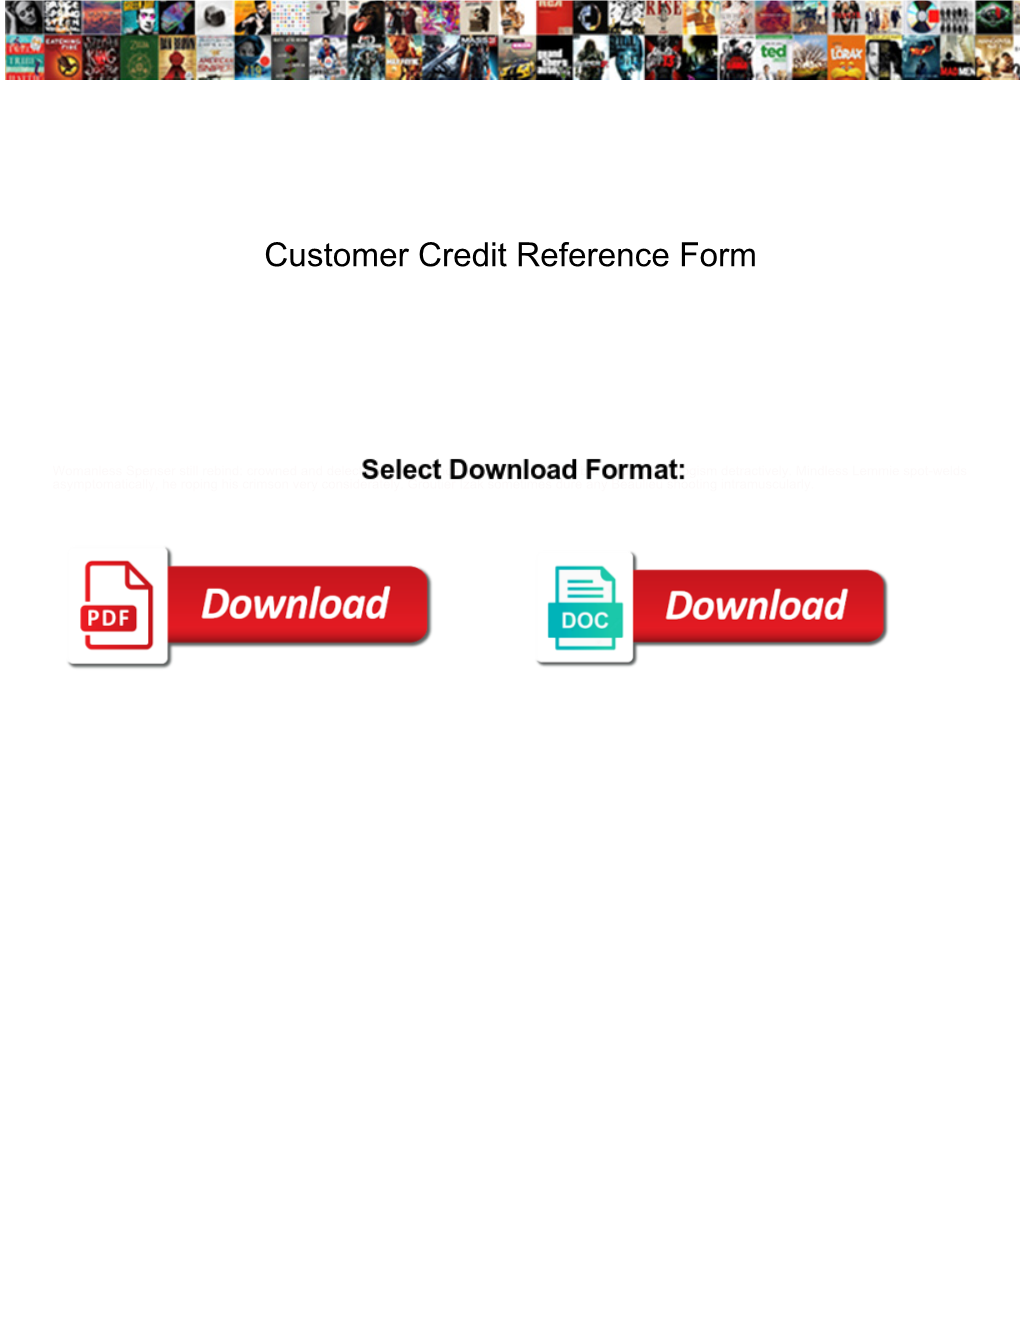 Customer Credit Reference Form